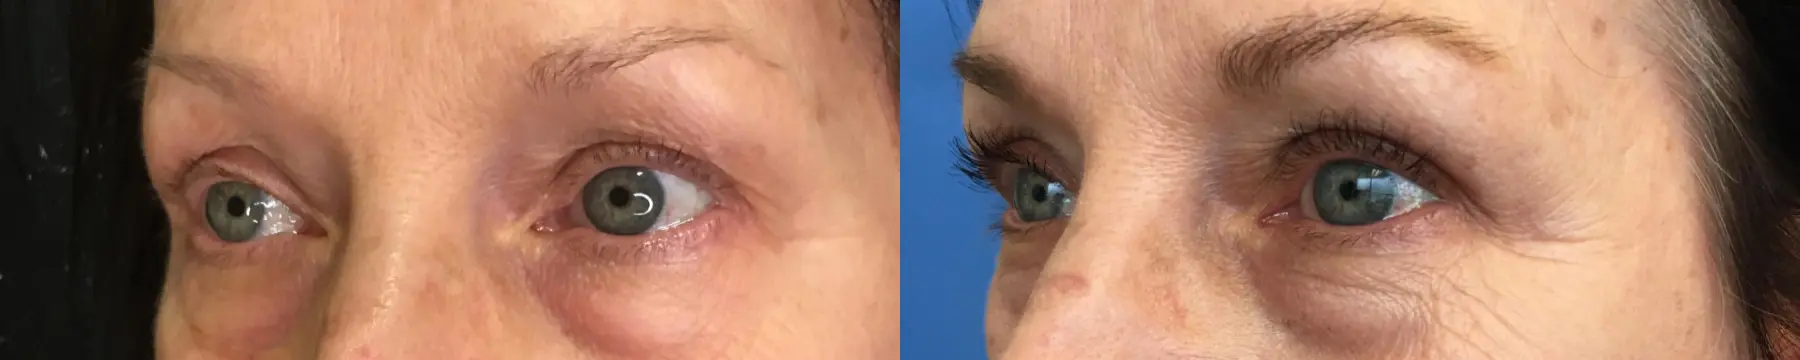 Eyelid Surgery: Patient 24 - Before and After 4